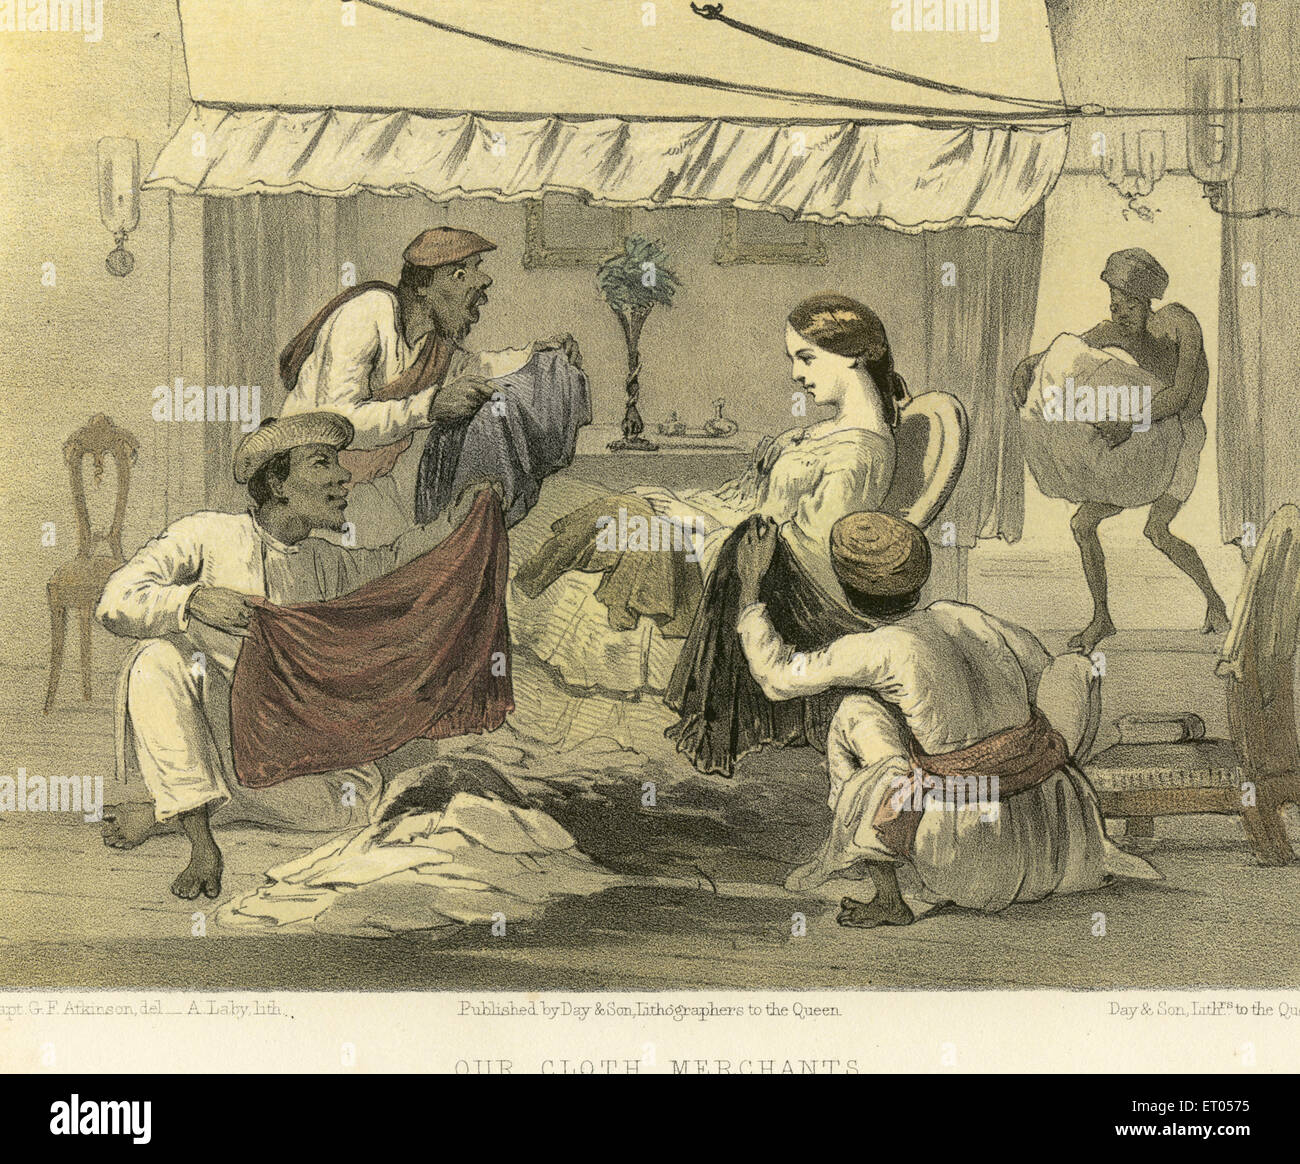 Colonial Indian images ; our cloth merchants ; India Stock Photo